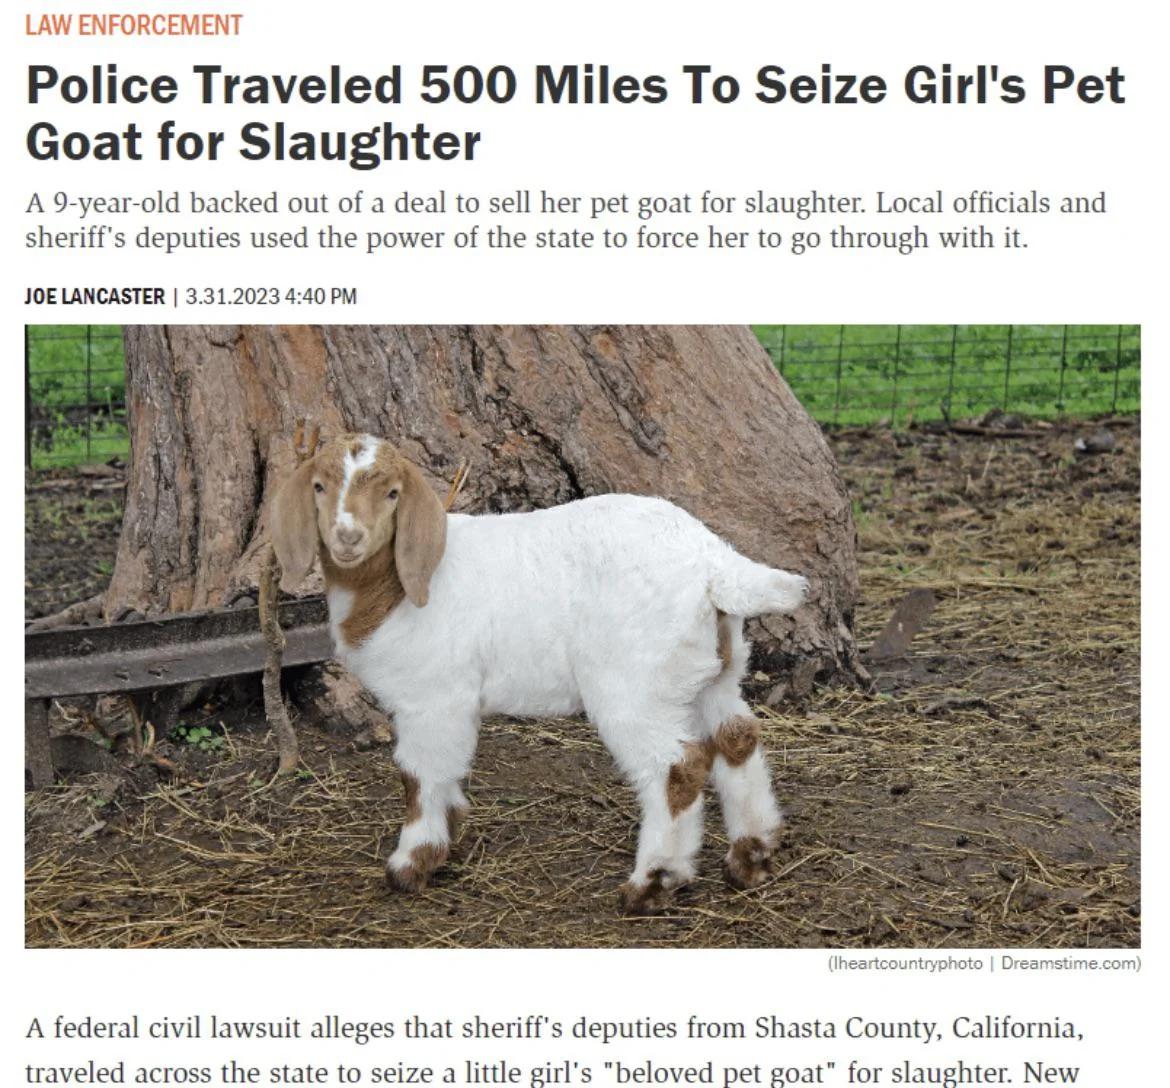 trashy people - 9 year old goat - Law Enforcement Police Traveled 500 Miles To Seize Girl's Pet Goat for Slaughter A 9yearold backed out of a deal to sell her pet goat for slaughter. Local officials and sheriff's deputies used the power of the state to fo